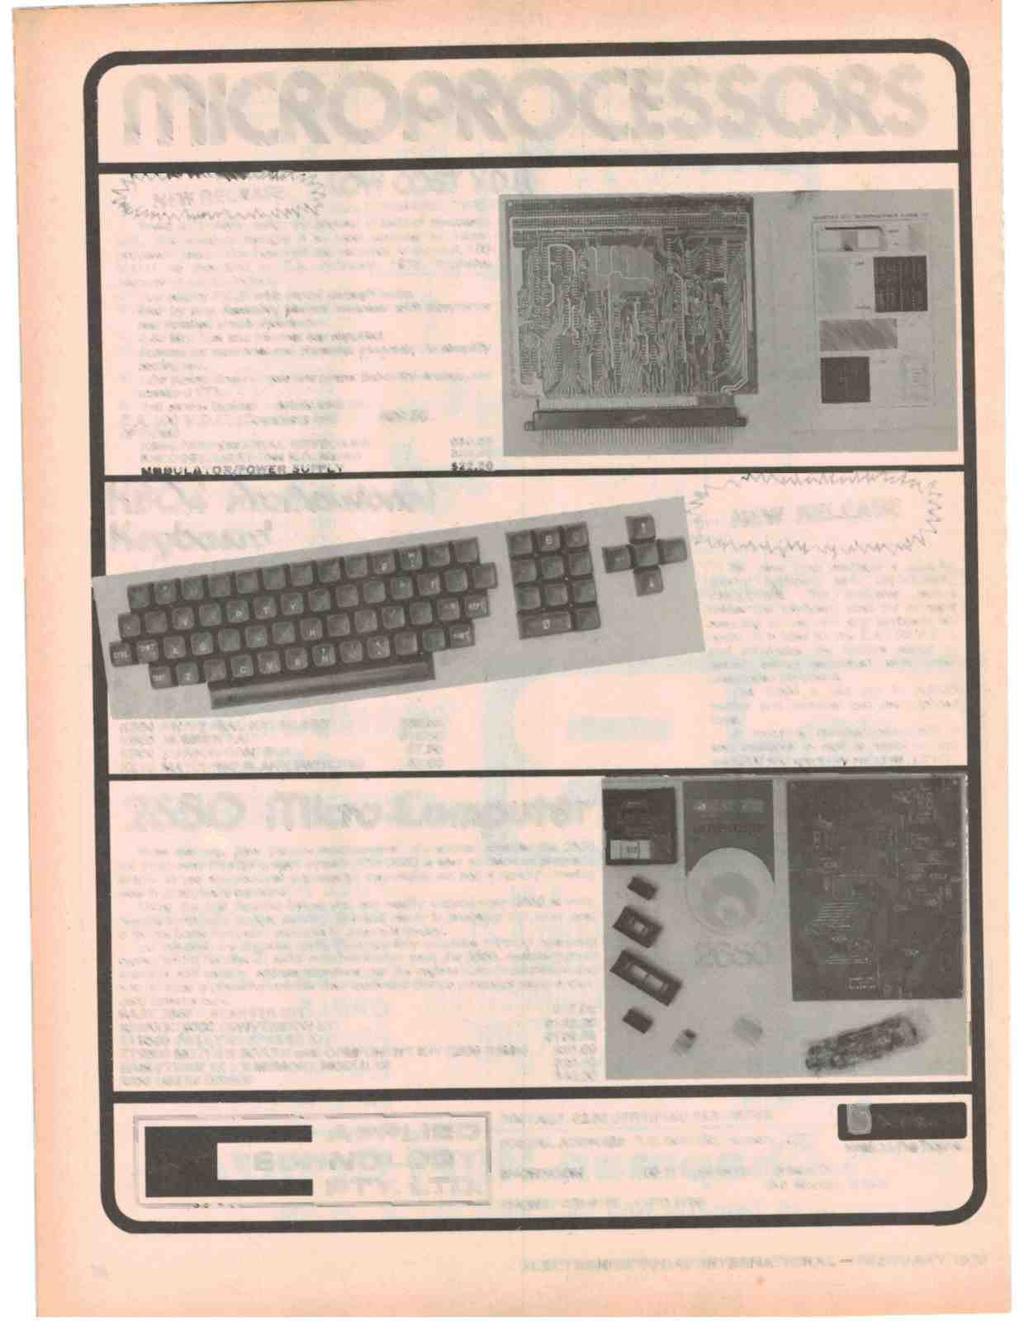 `.. LOW ICROPROCE SSORS NEW RELEASE COST V.D.U. (E.A. FEB/MARCH 1978) Based on a clever design by Michael O'Neill of Newcastle Uni., this compact module is an ideal terminal for microprocessor users.